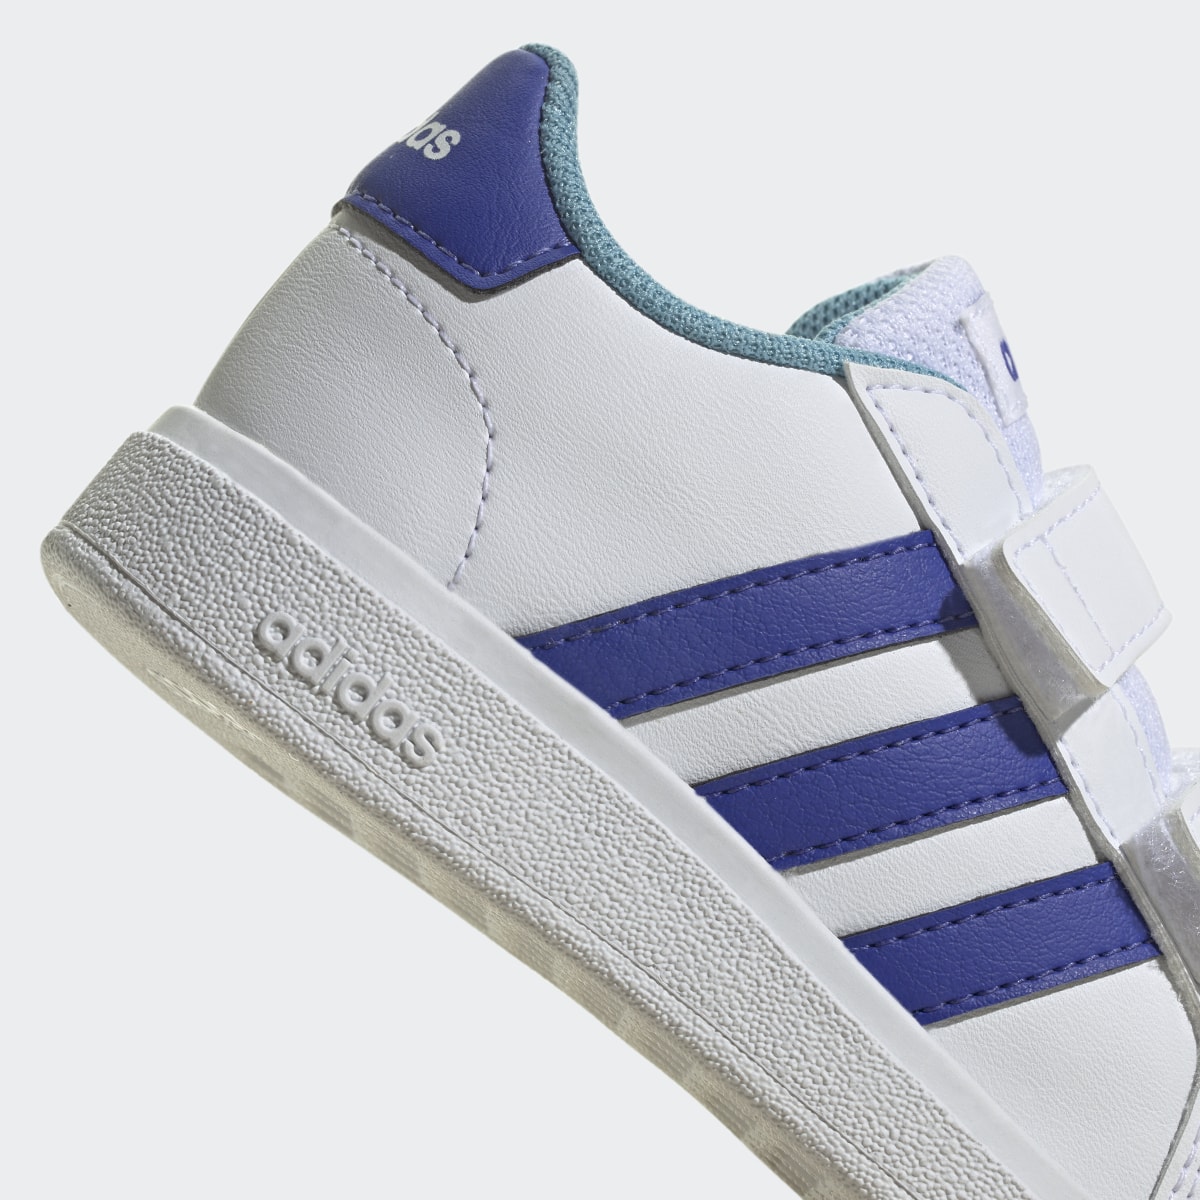 Adidas Grand Court Lifestyle Hook and Loop Shoes. 9